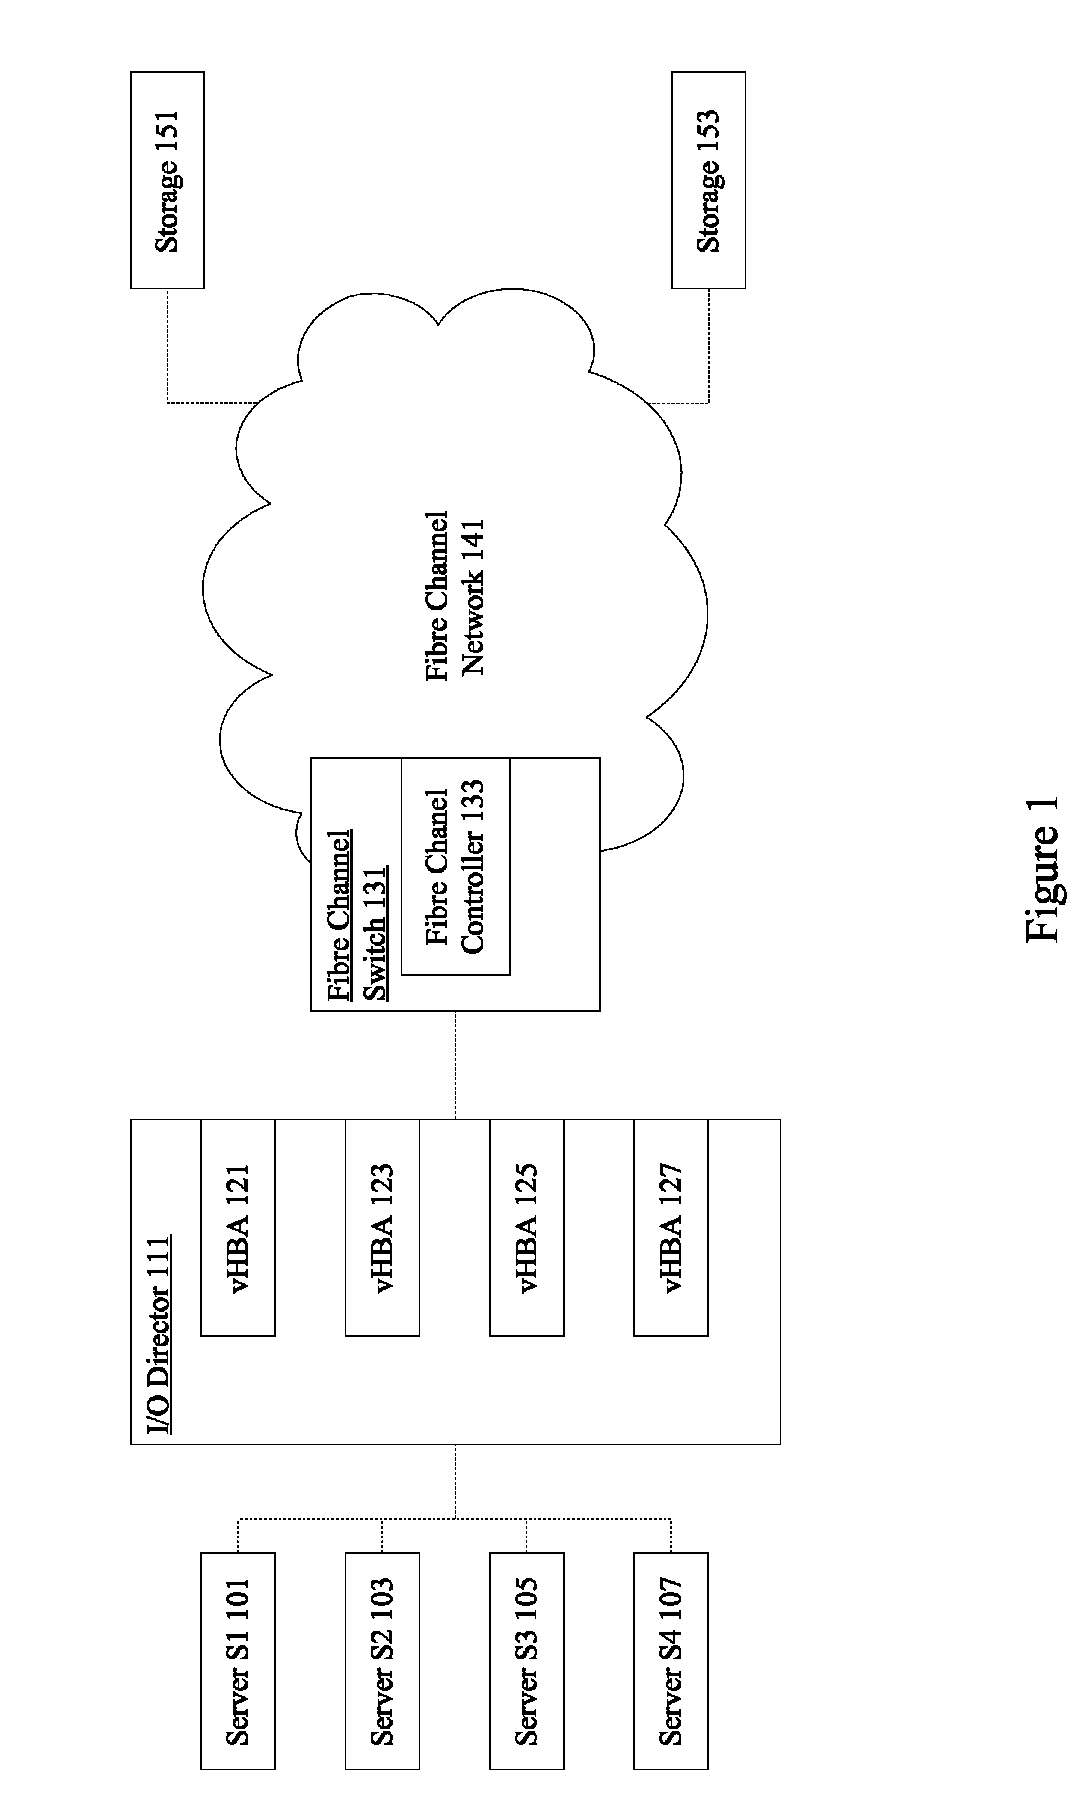 Coalescing change notifications in an I/O virtualization system